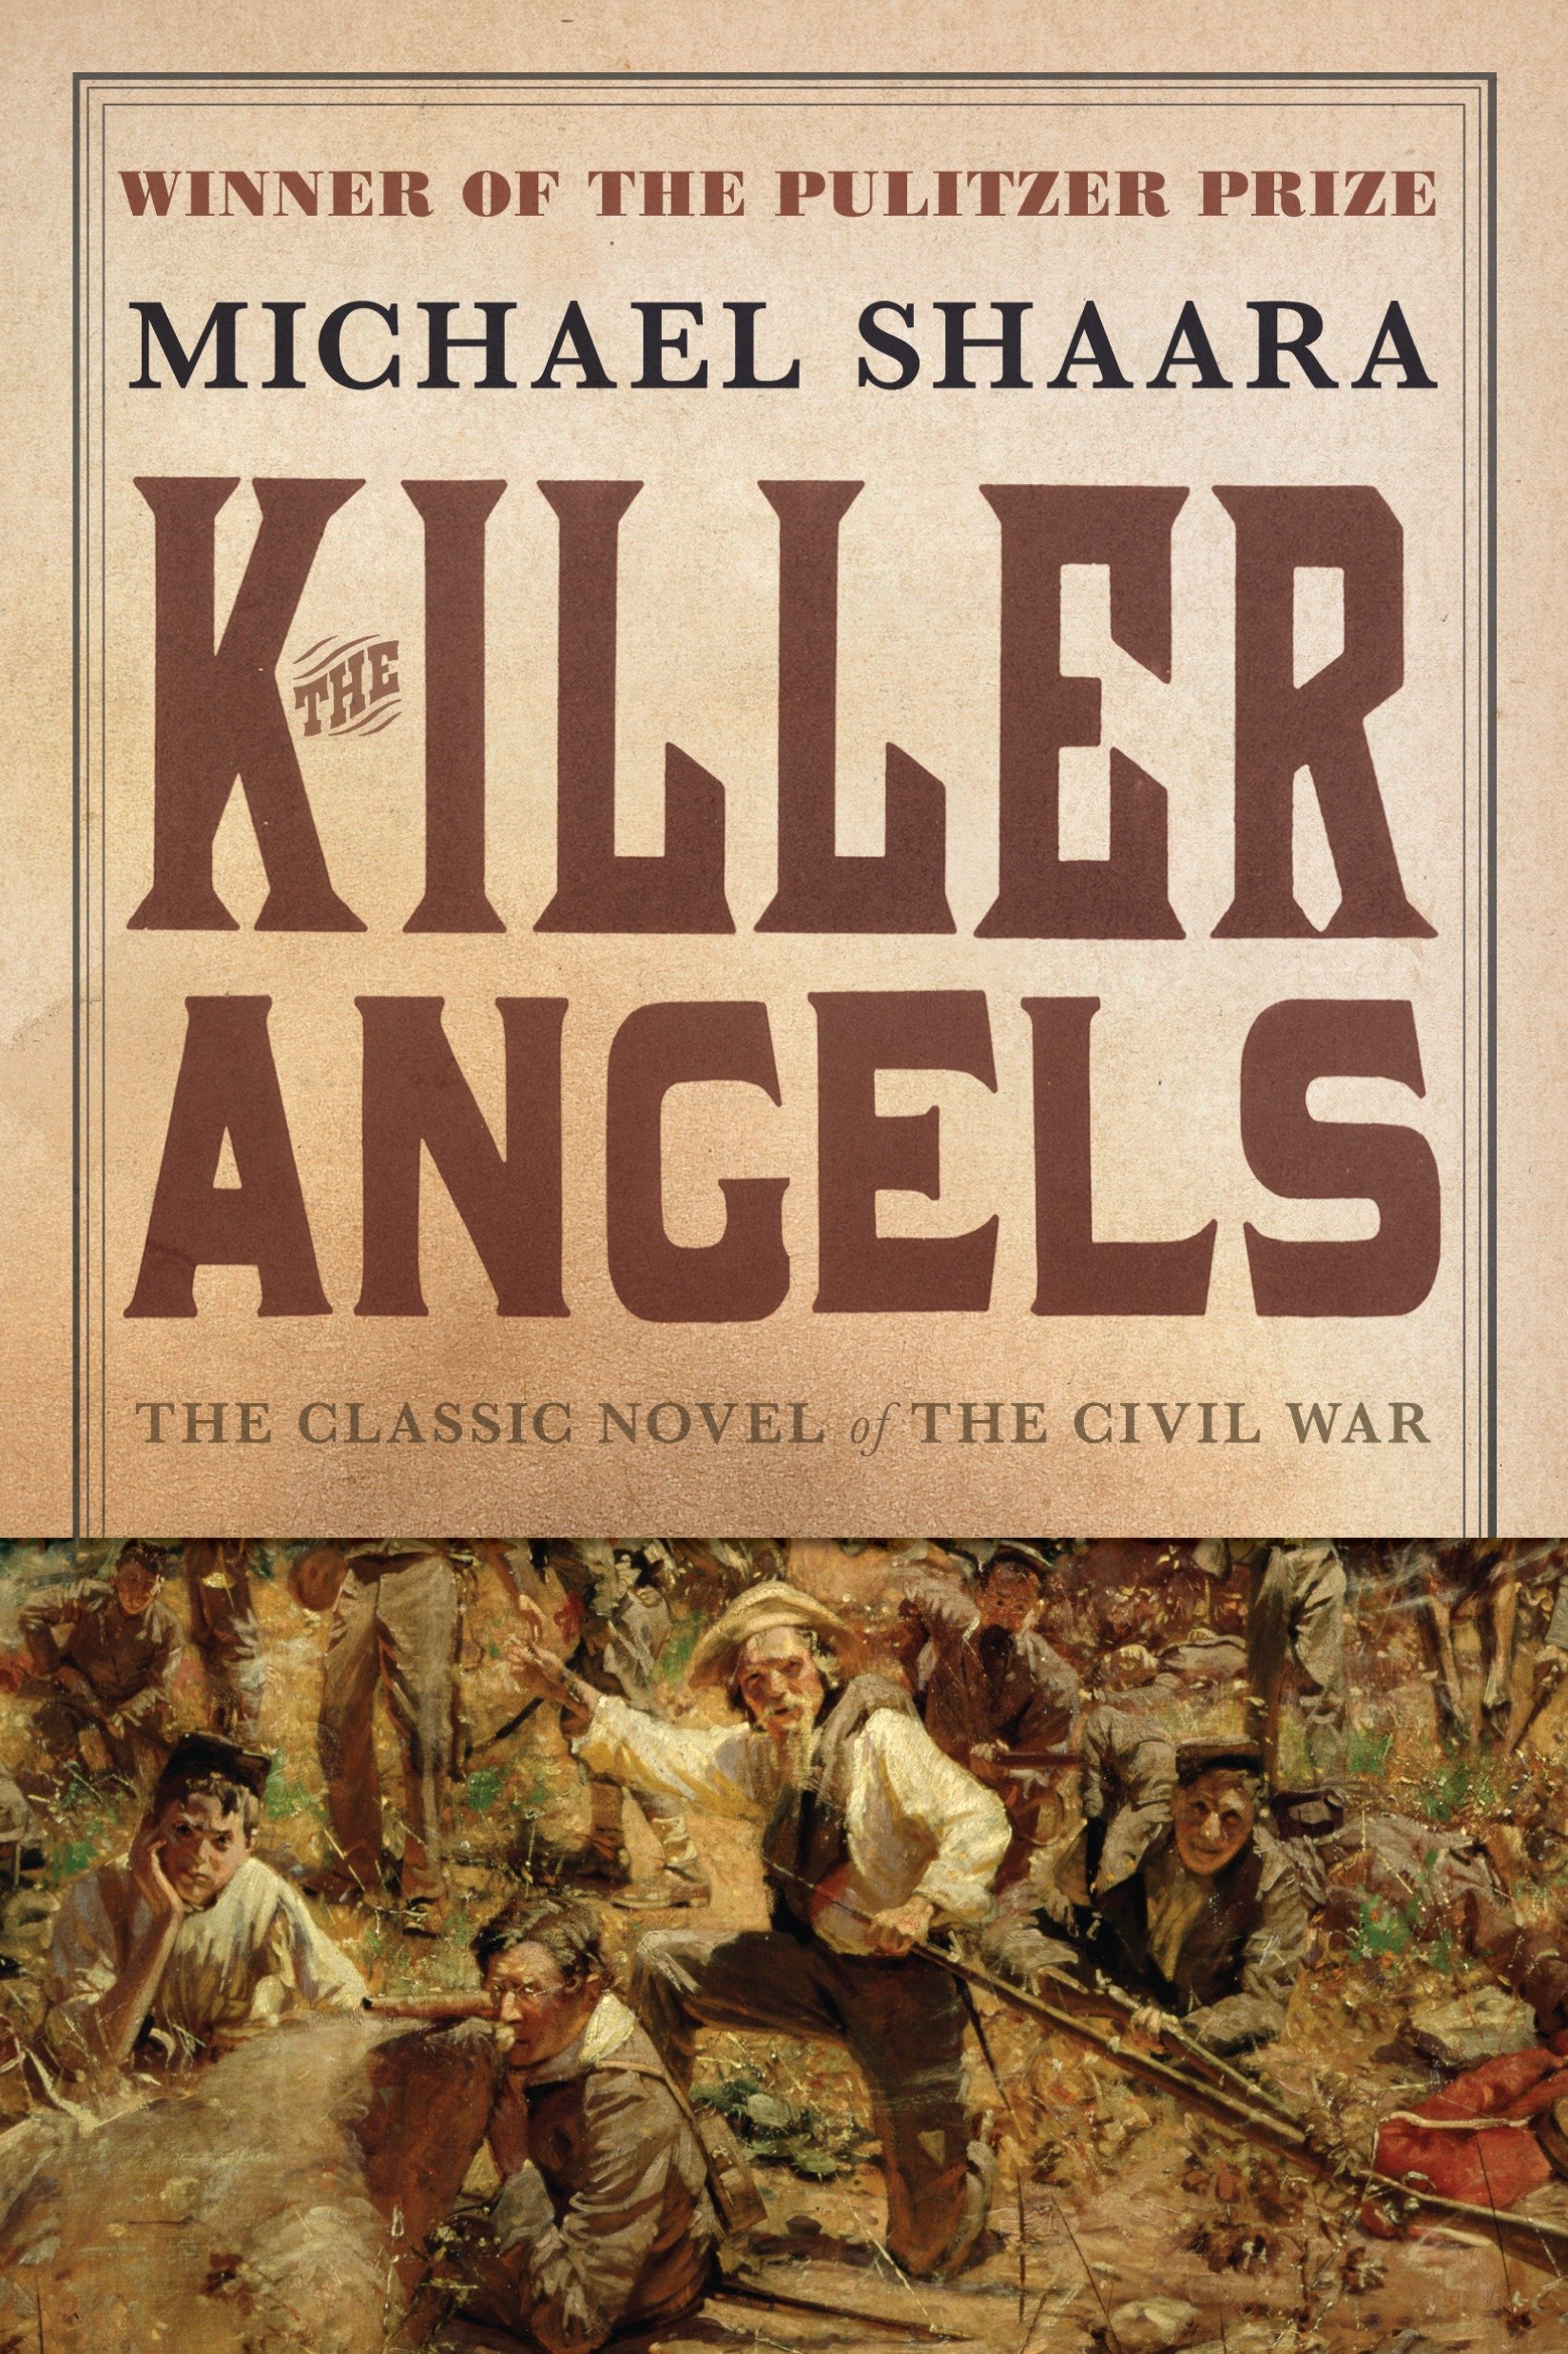 The killer angels cover image